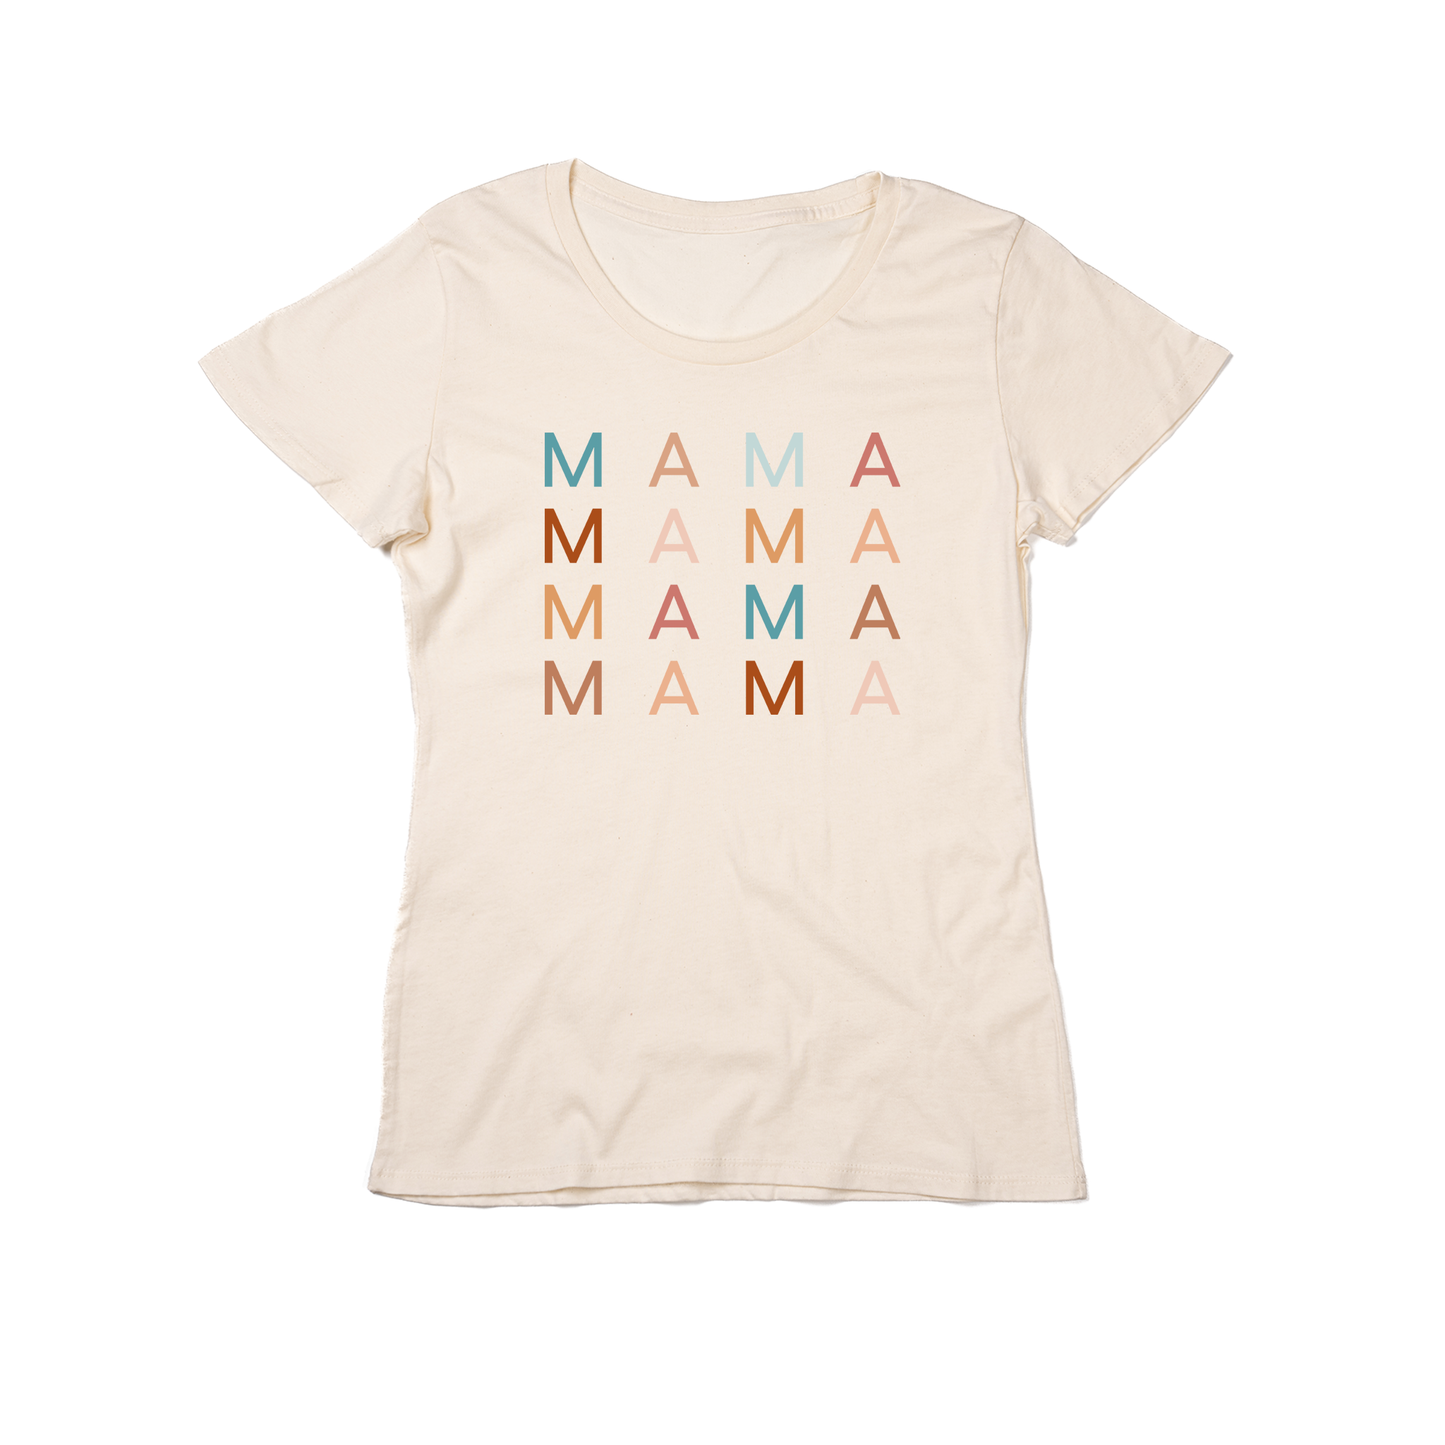 Mama (Stacked Multicolor, Across Front) - Women's Fitted Tee (Natural)